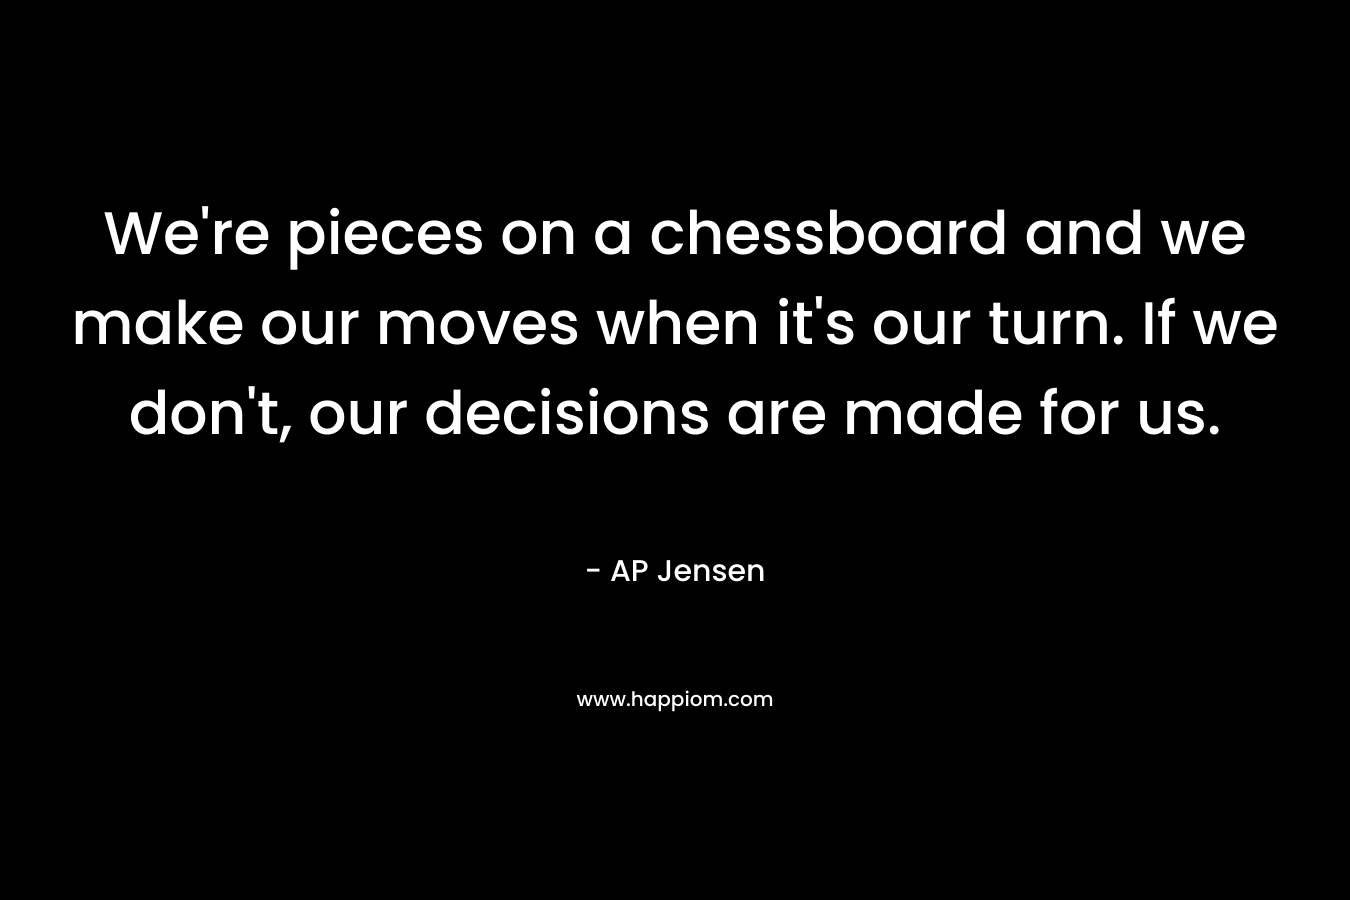 We're pieces on a chessboard and we make our moves when it's our turn. If we don't, our decisions are made for us.